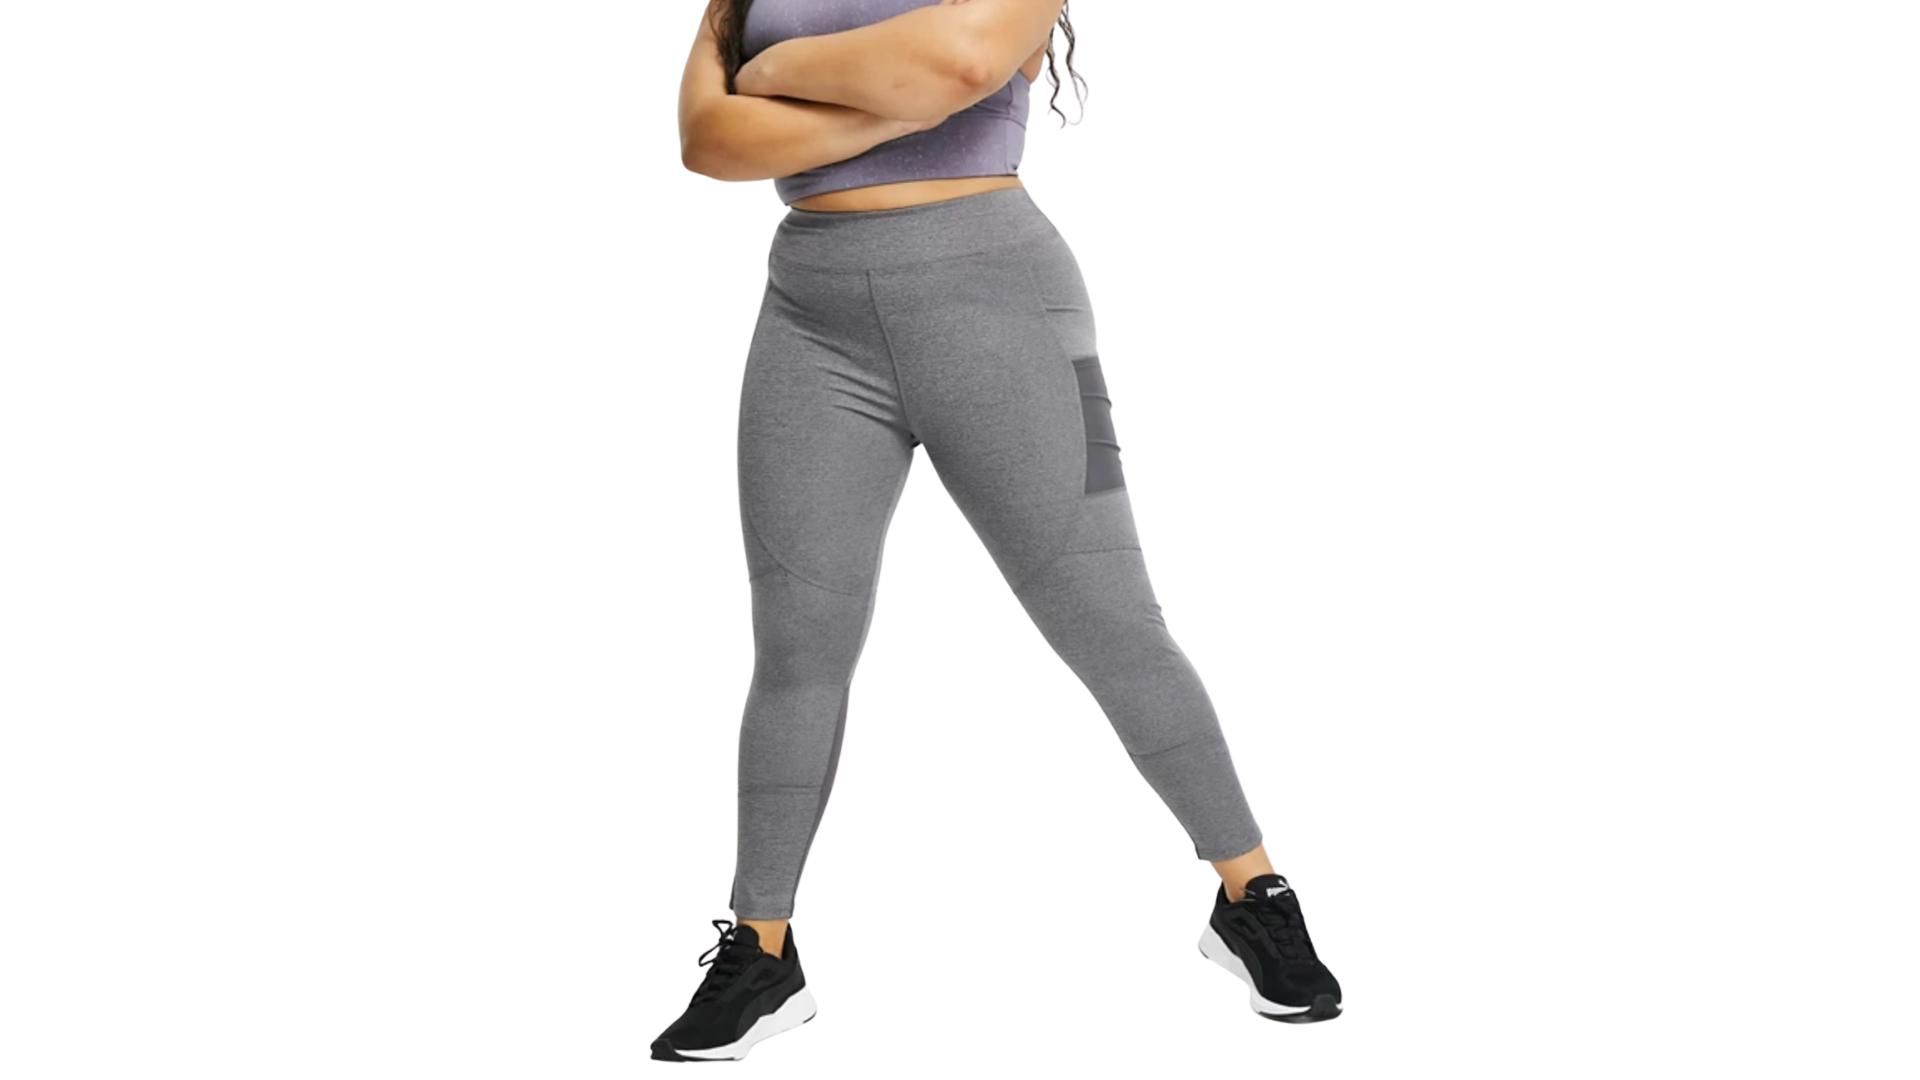 ASOS best plus size leggings with pockets